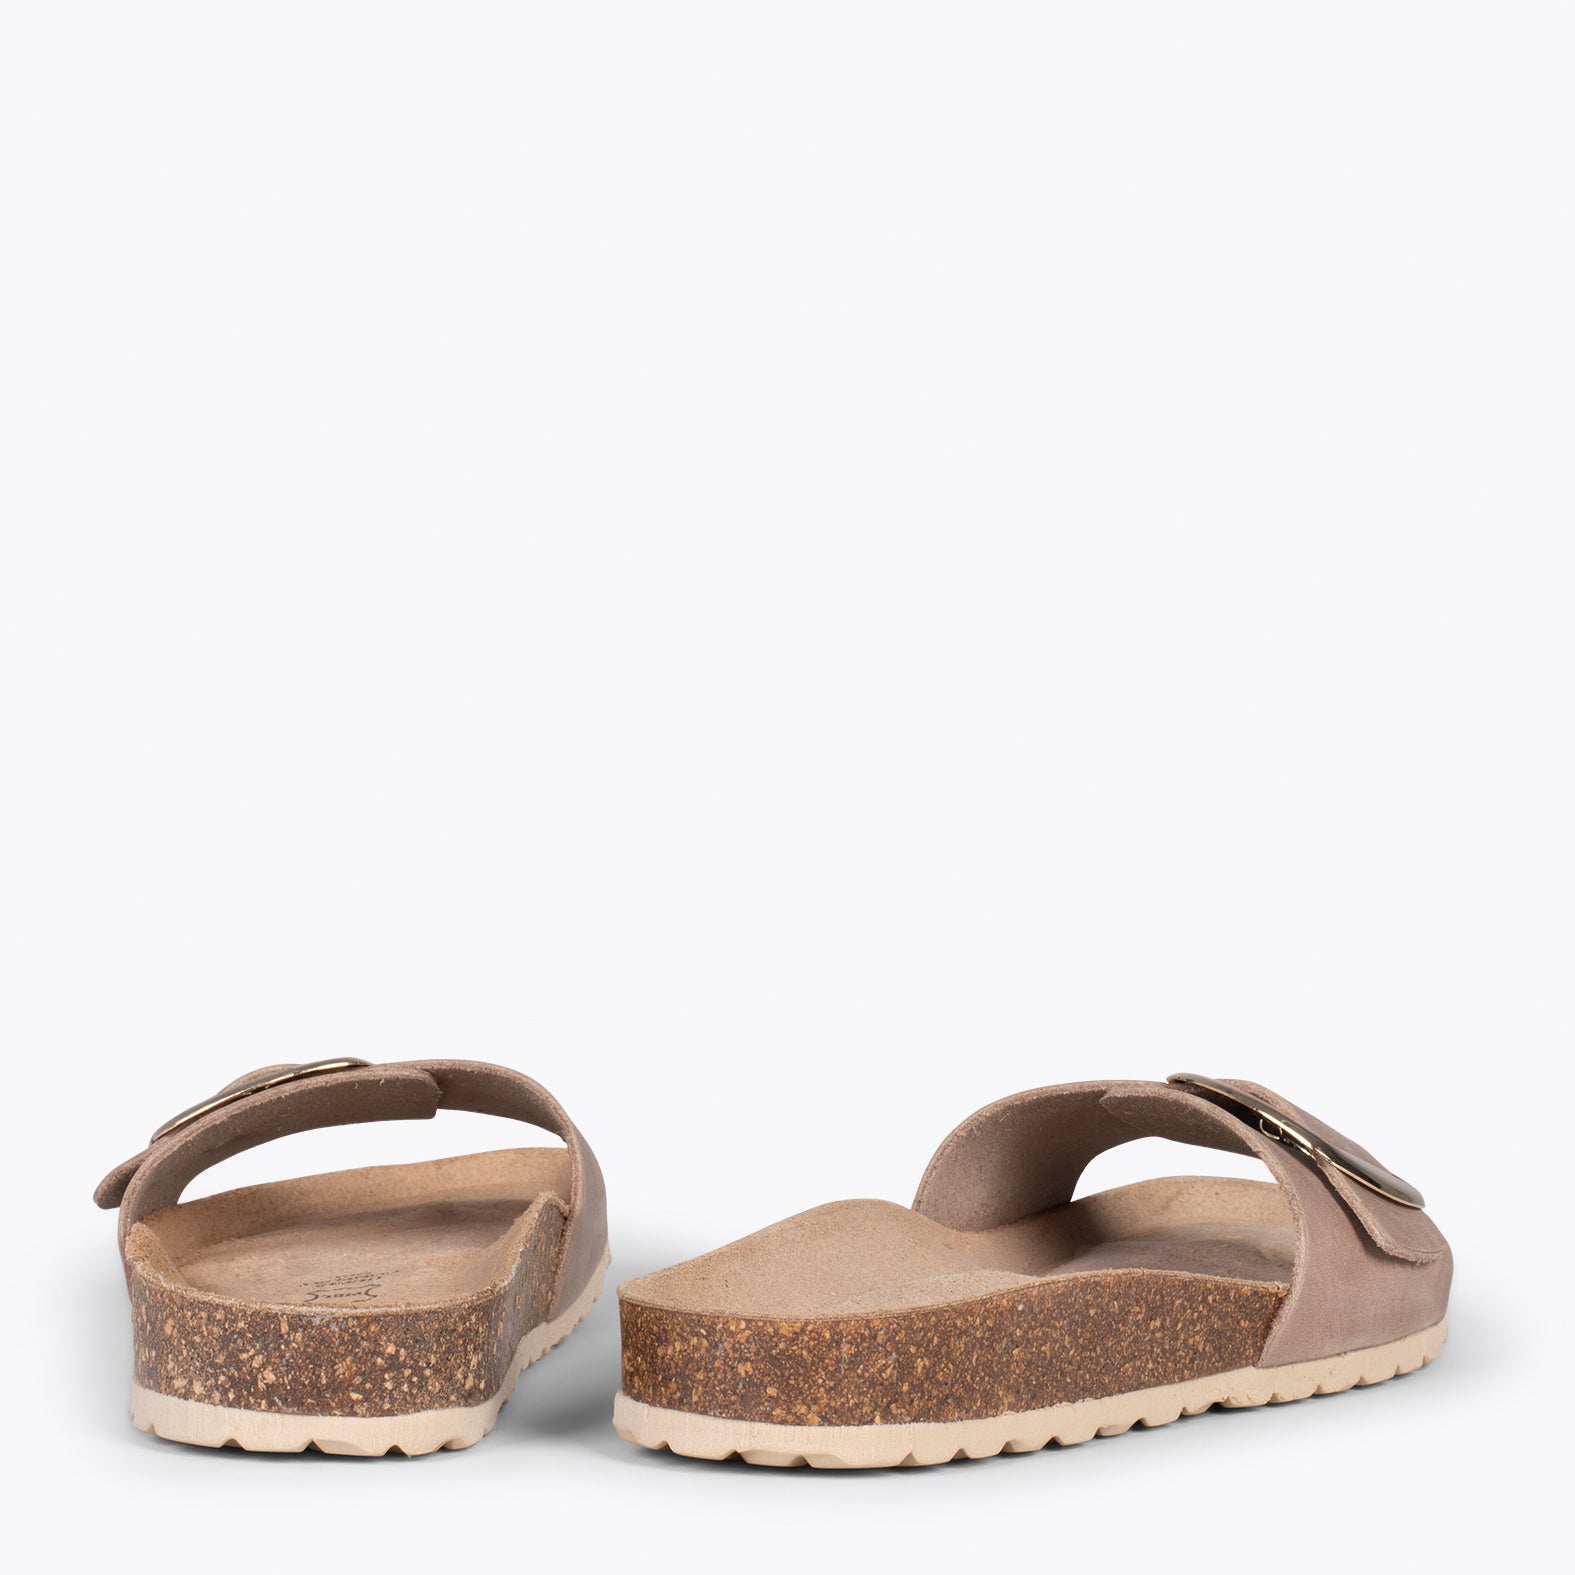 CLAVEL – TAUPE leather slides with buckle